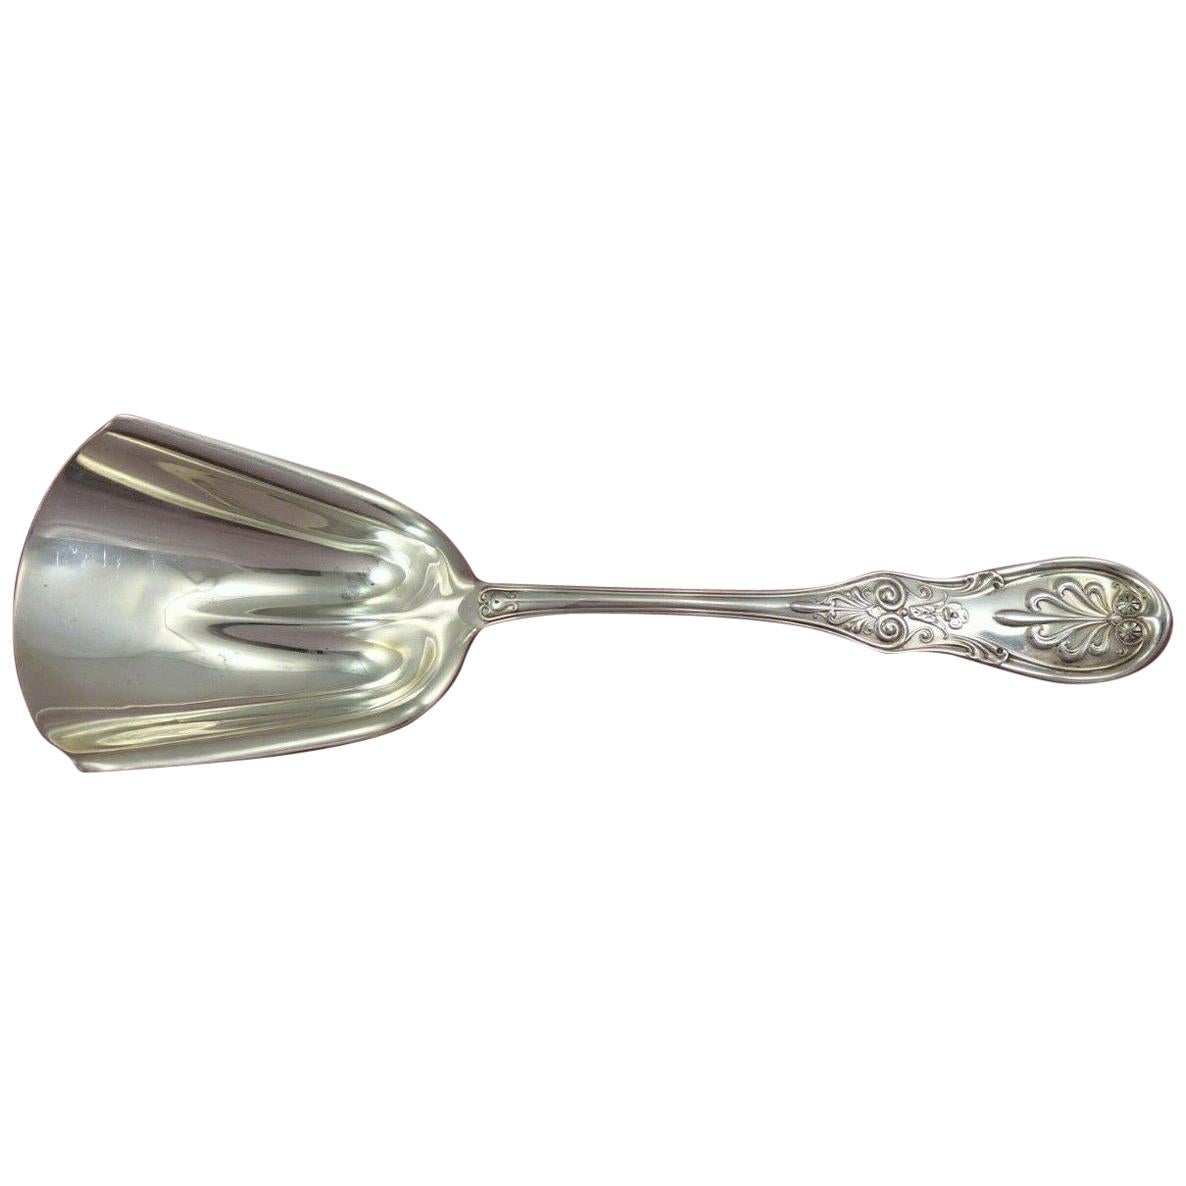 Saratoga by Tiffany & Co Sterling Silver Cracker Scoop Serving Antique